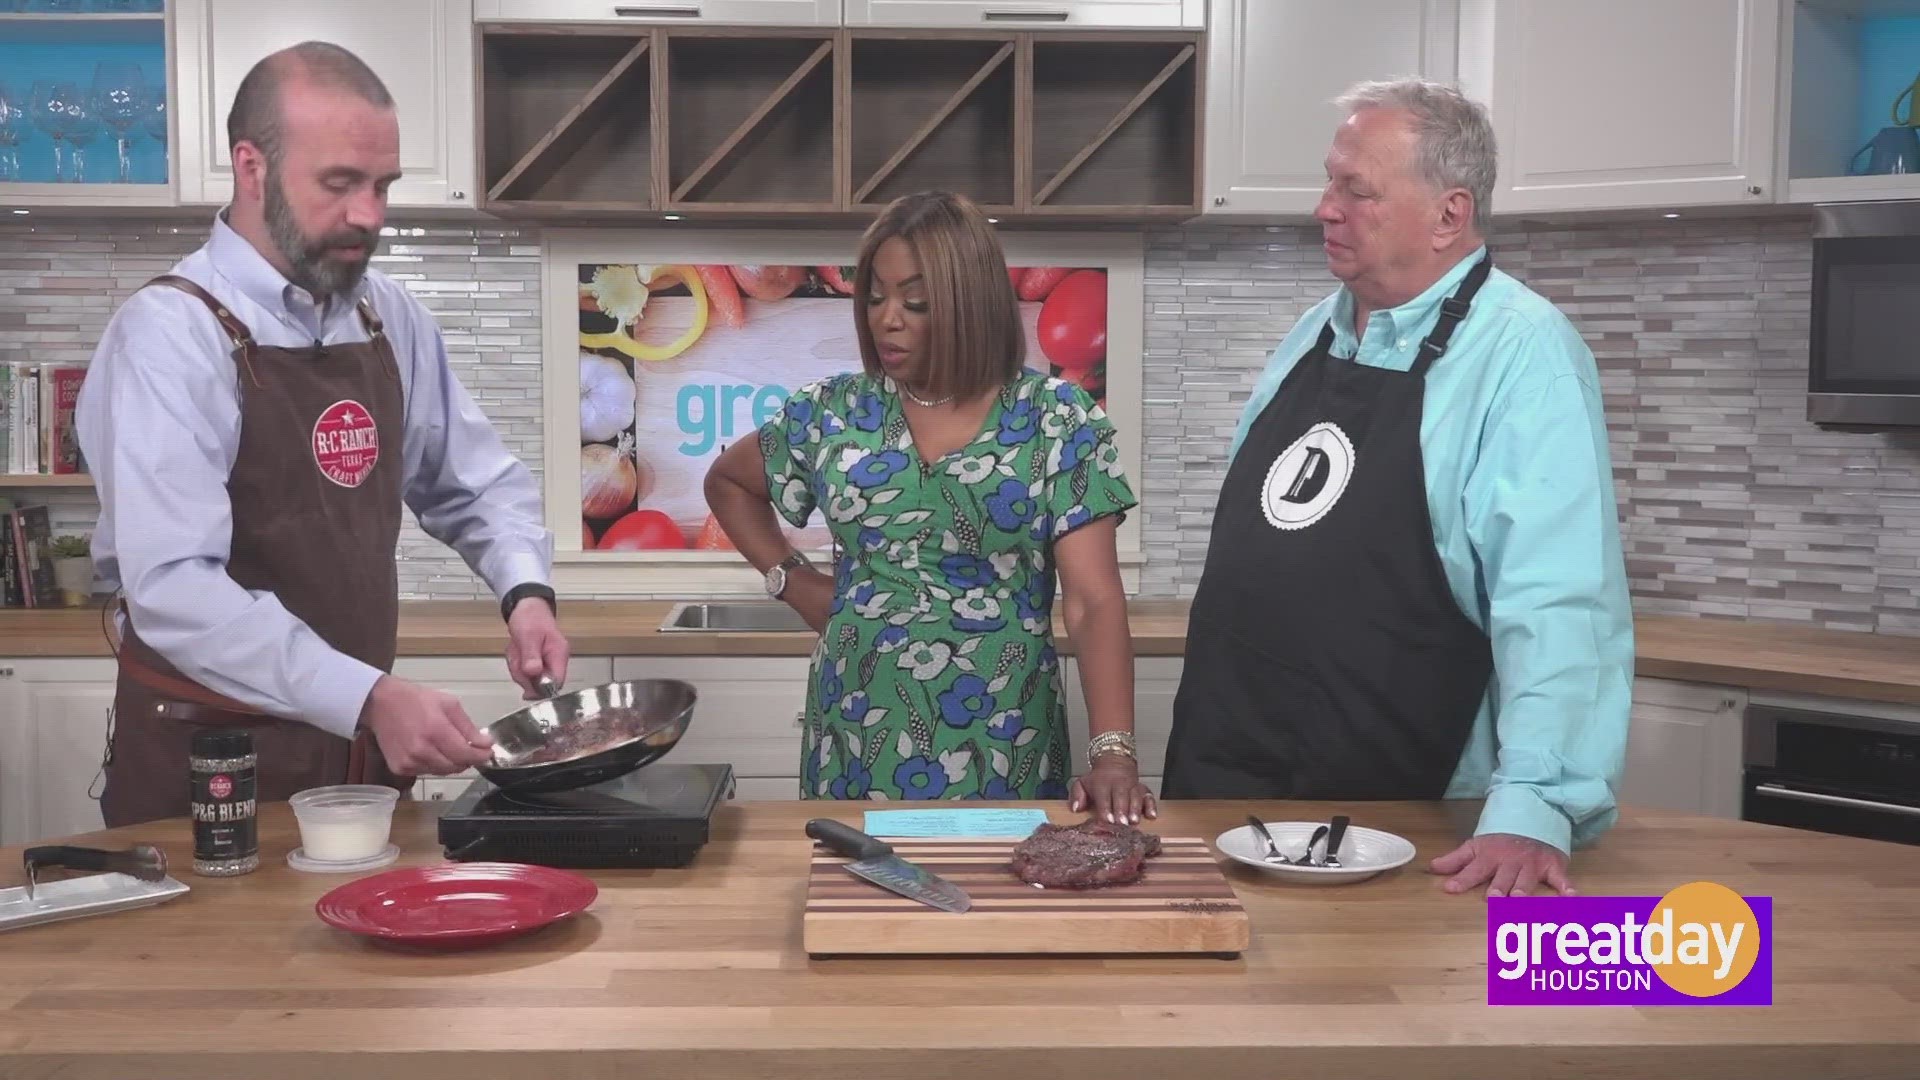 Duke Dirksmeyer and Jeremy Robinson share their tips for cooking the perfect steak at home.